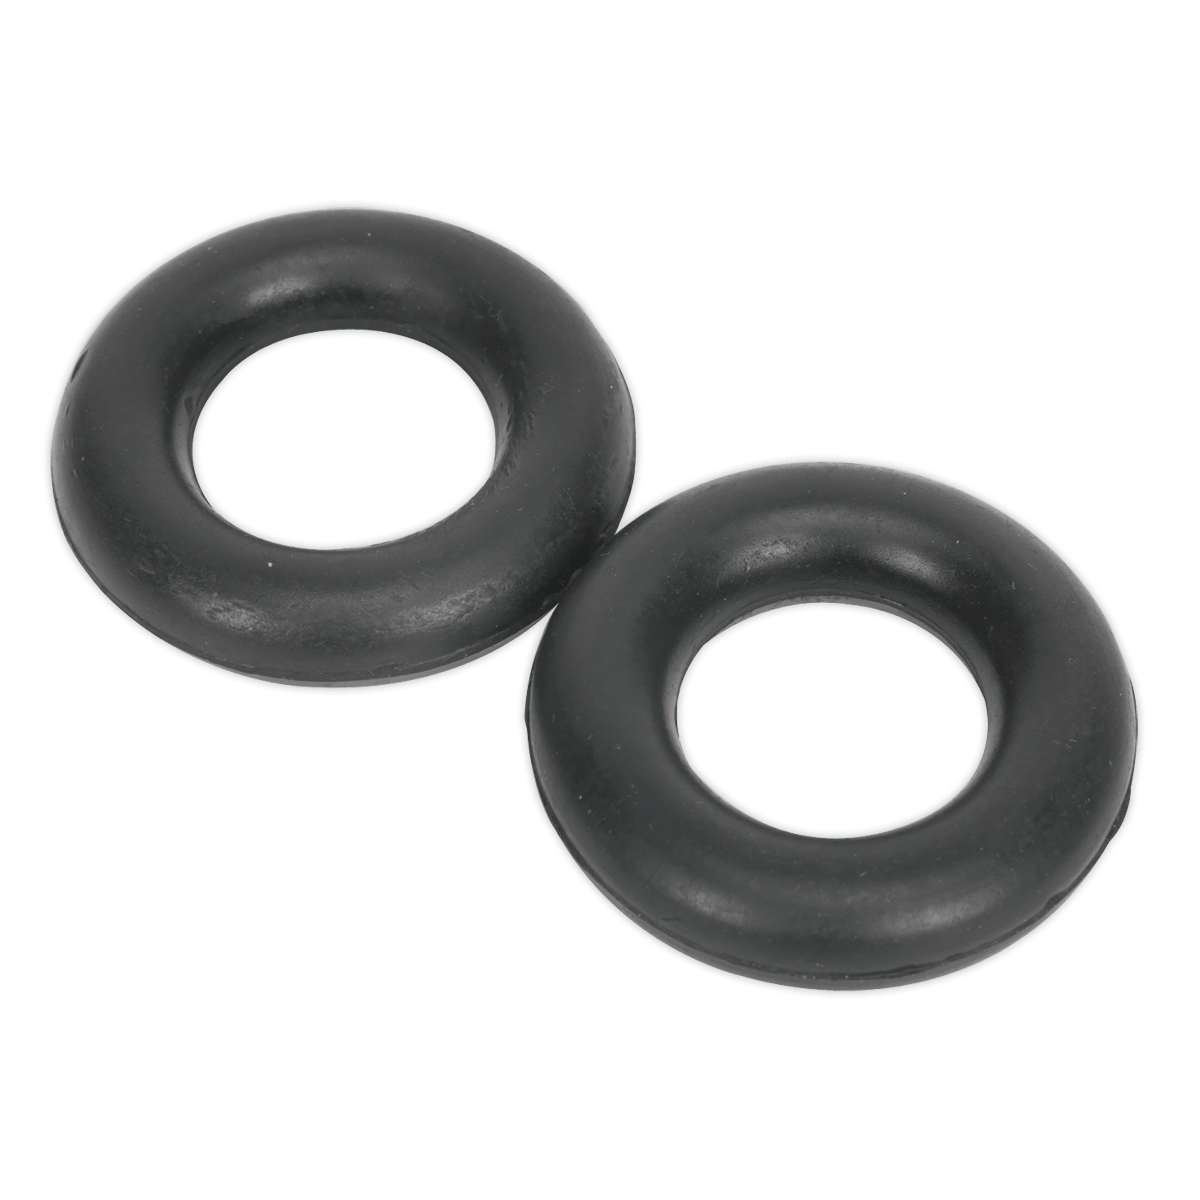 Sealey Exhaust Mounting Rubbers - L59 x W59 x D13.5 (Pack of 2) EX04